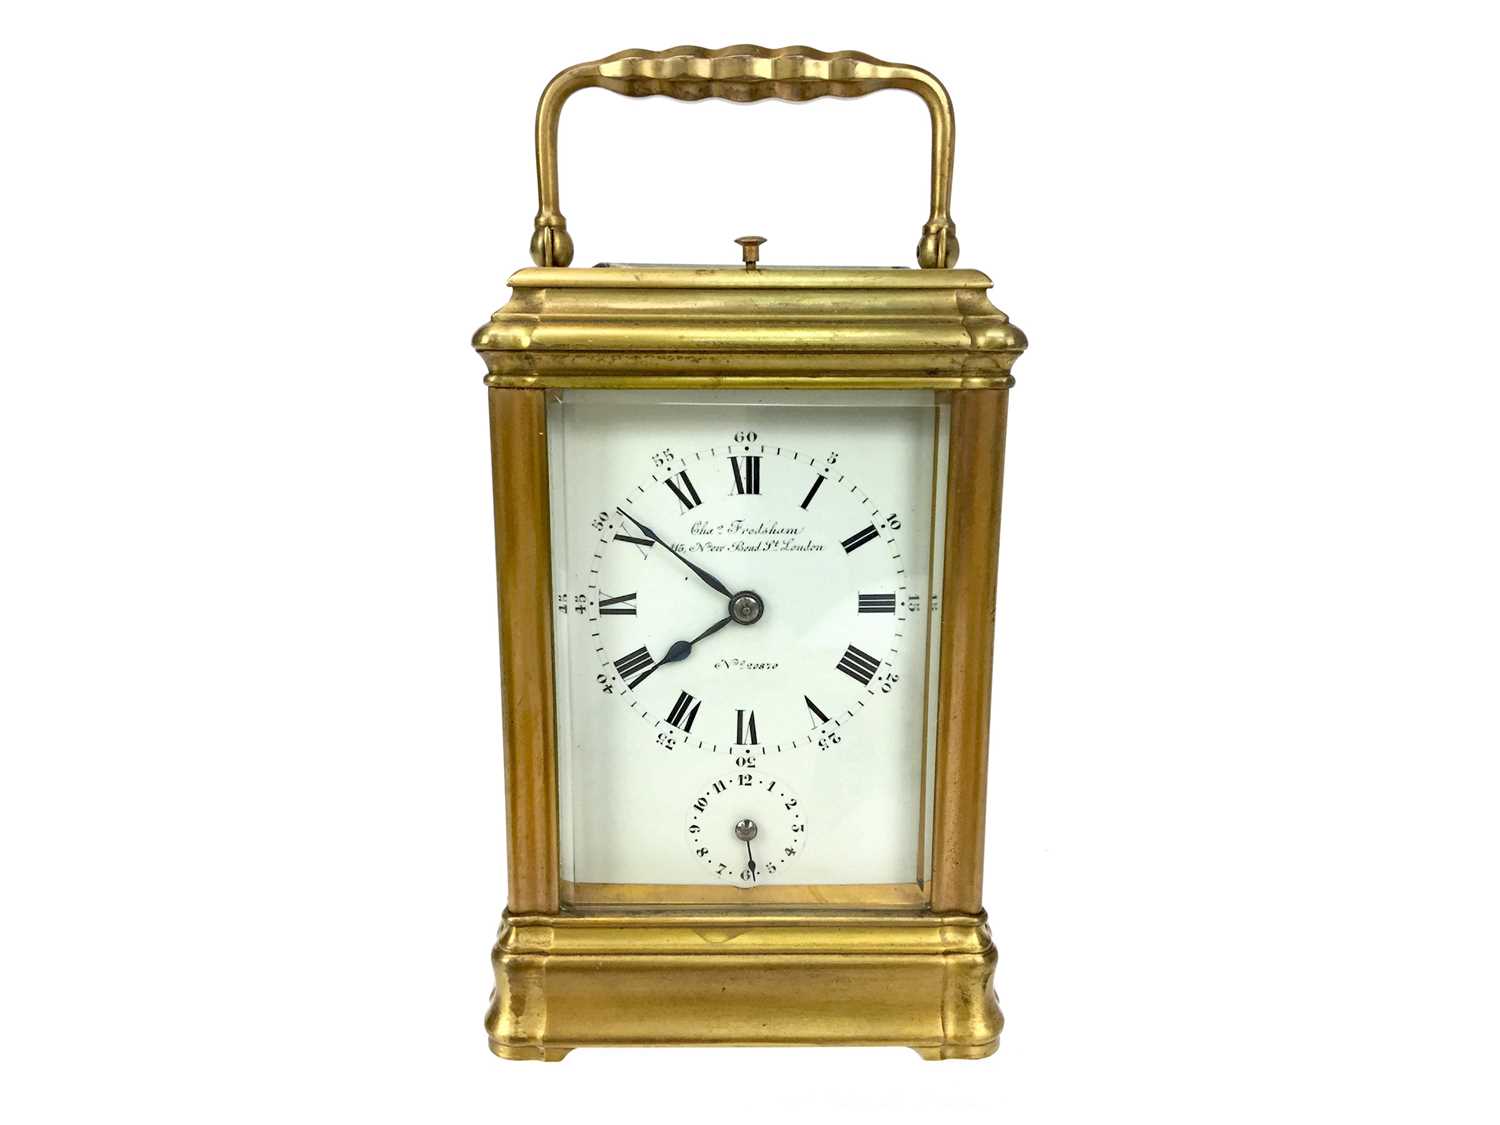 Lot 1154 - A LATE VICTORIAN CARRIAGE CLOCK BY CHARLES FRODSHAM